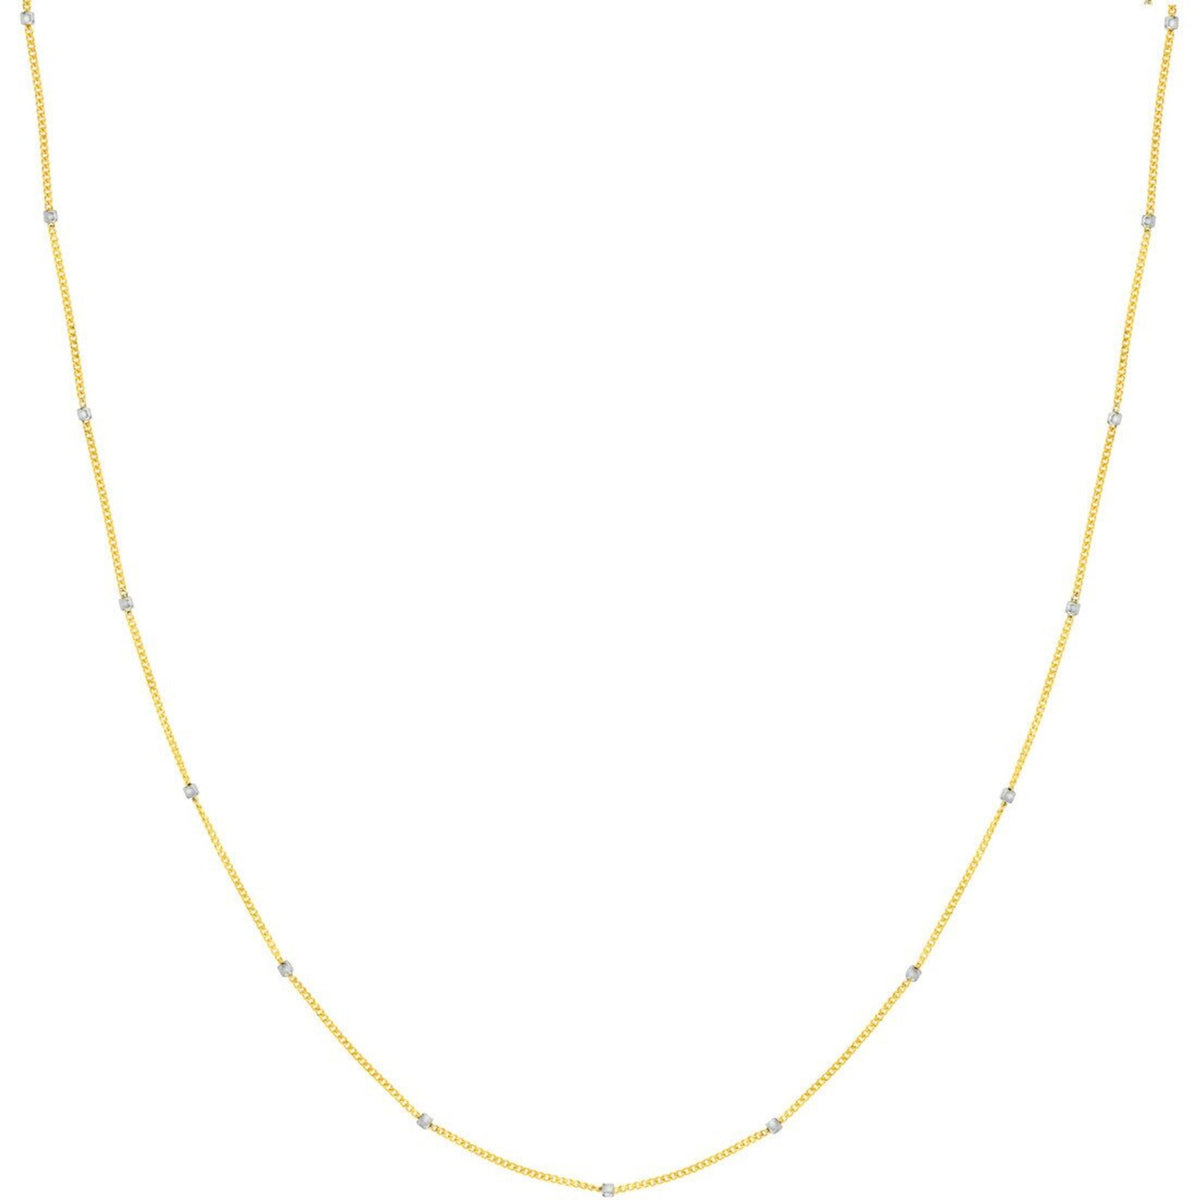 Olas d'Oro 22" Necklace - 14K Yellow/White Gold Two-Tone Cube Saturn Chain with Lobster Lock